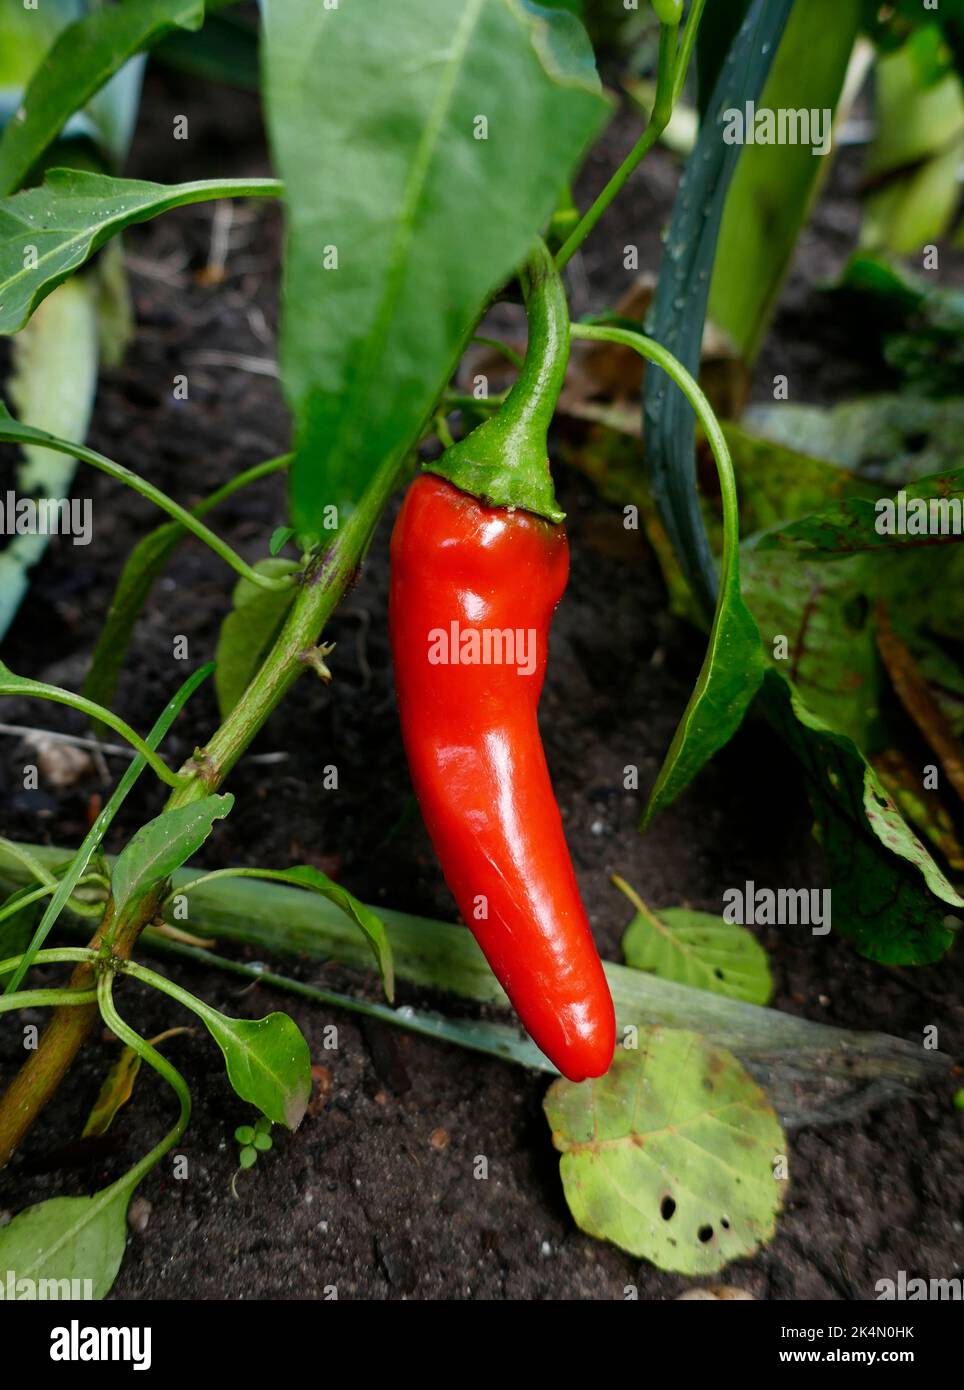 Ripe red chili pepper in a vegetable garden Stock Photo